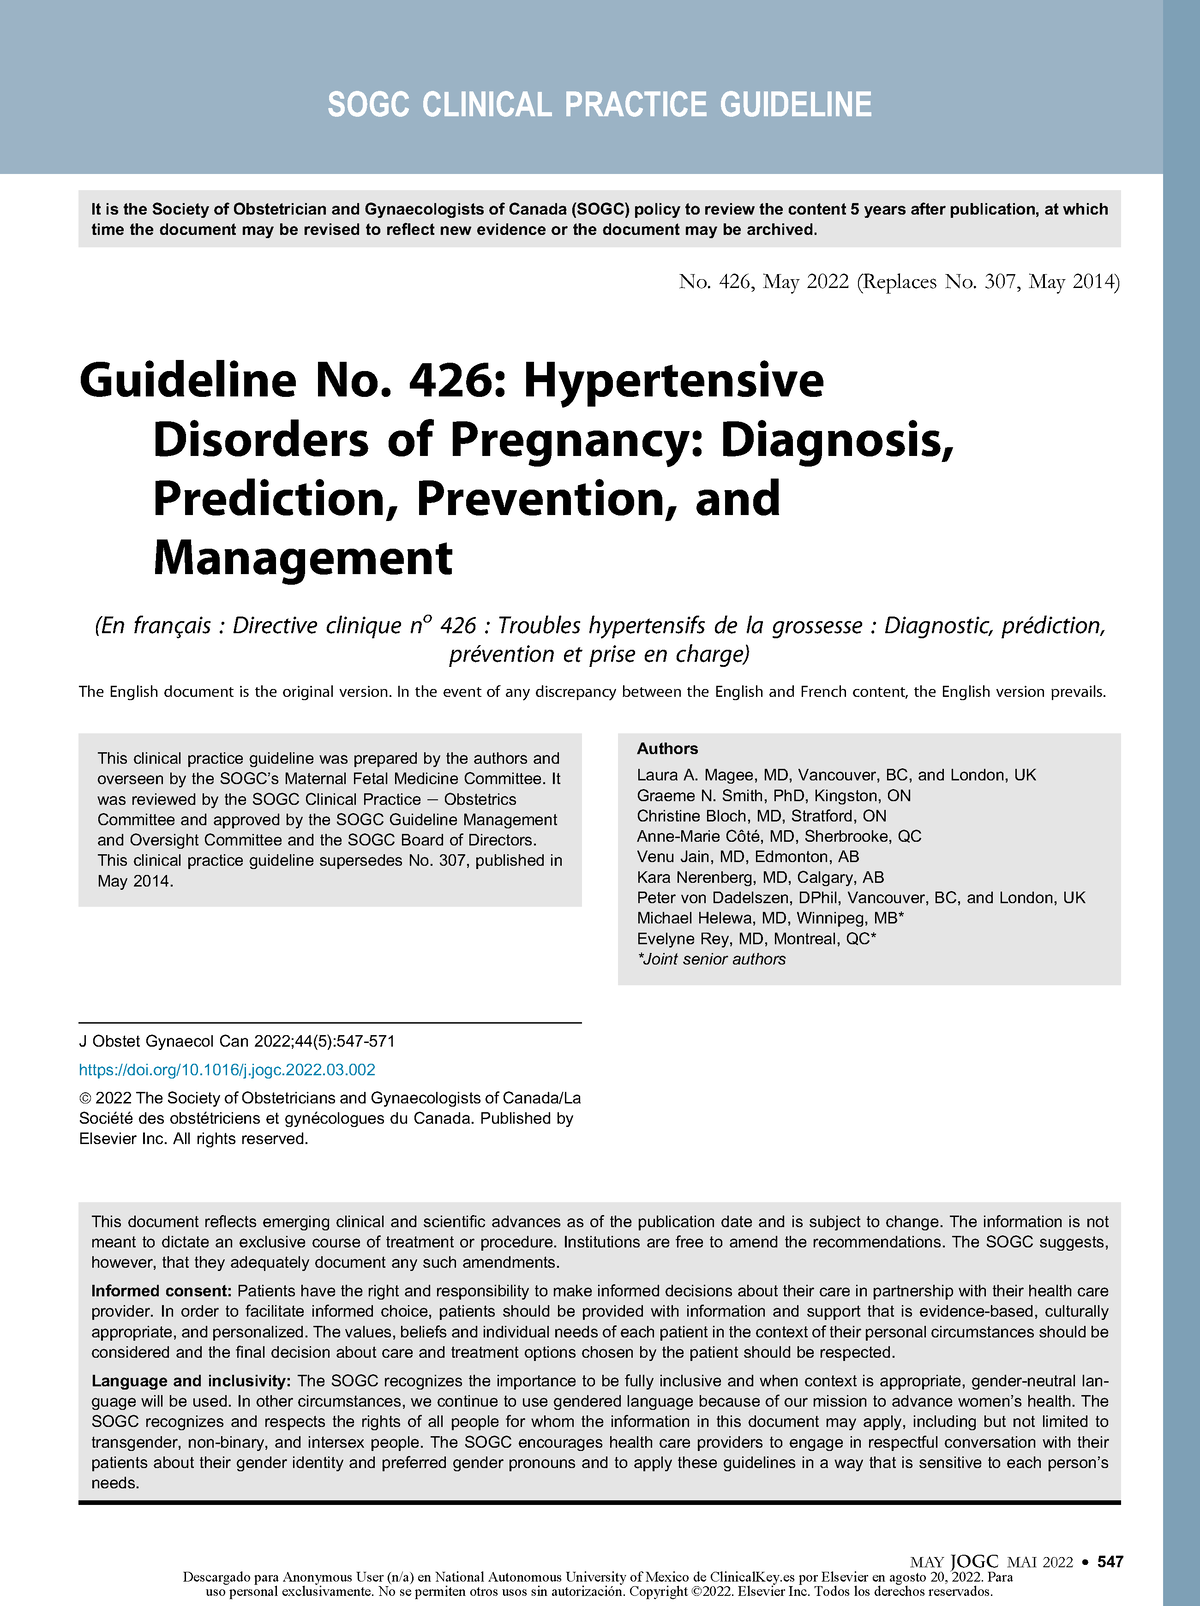 Guideline No. 426: Hypertensive Disorders of Pregnancy: Diagnosis,  Prediction, Prevention, and Management - Journal of Obstetrics and  Gynaecology Canada